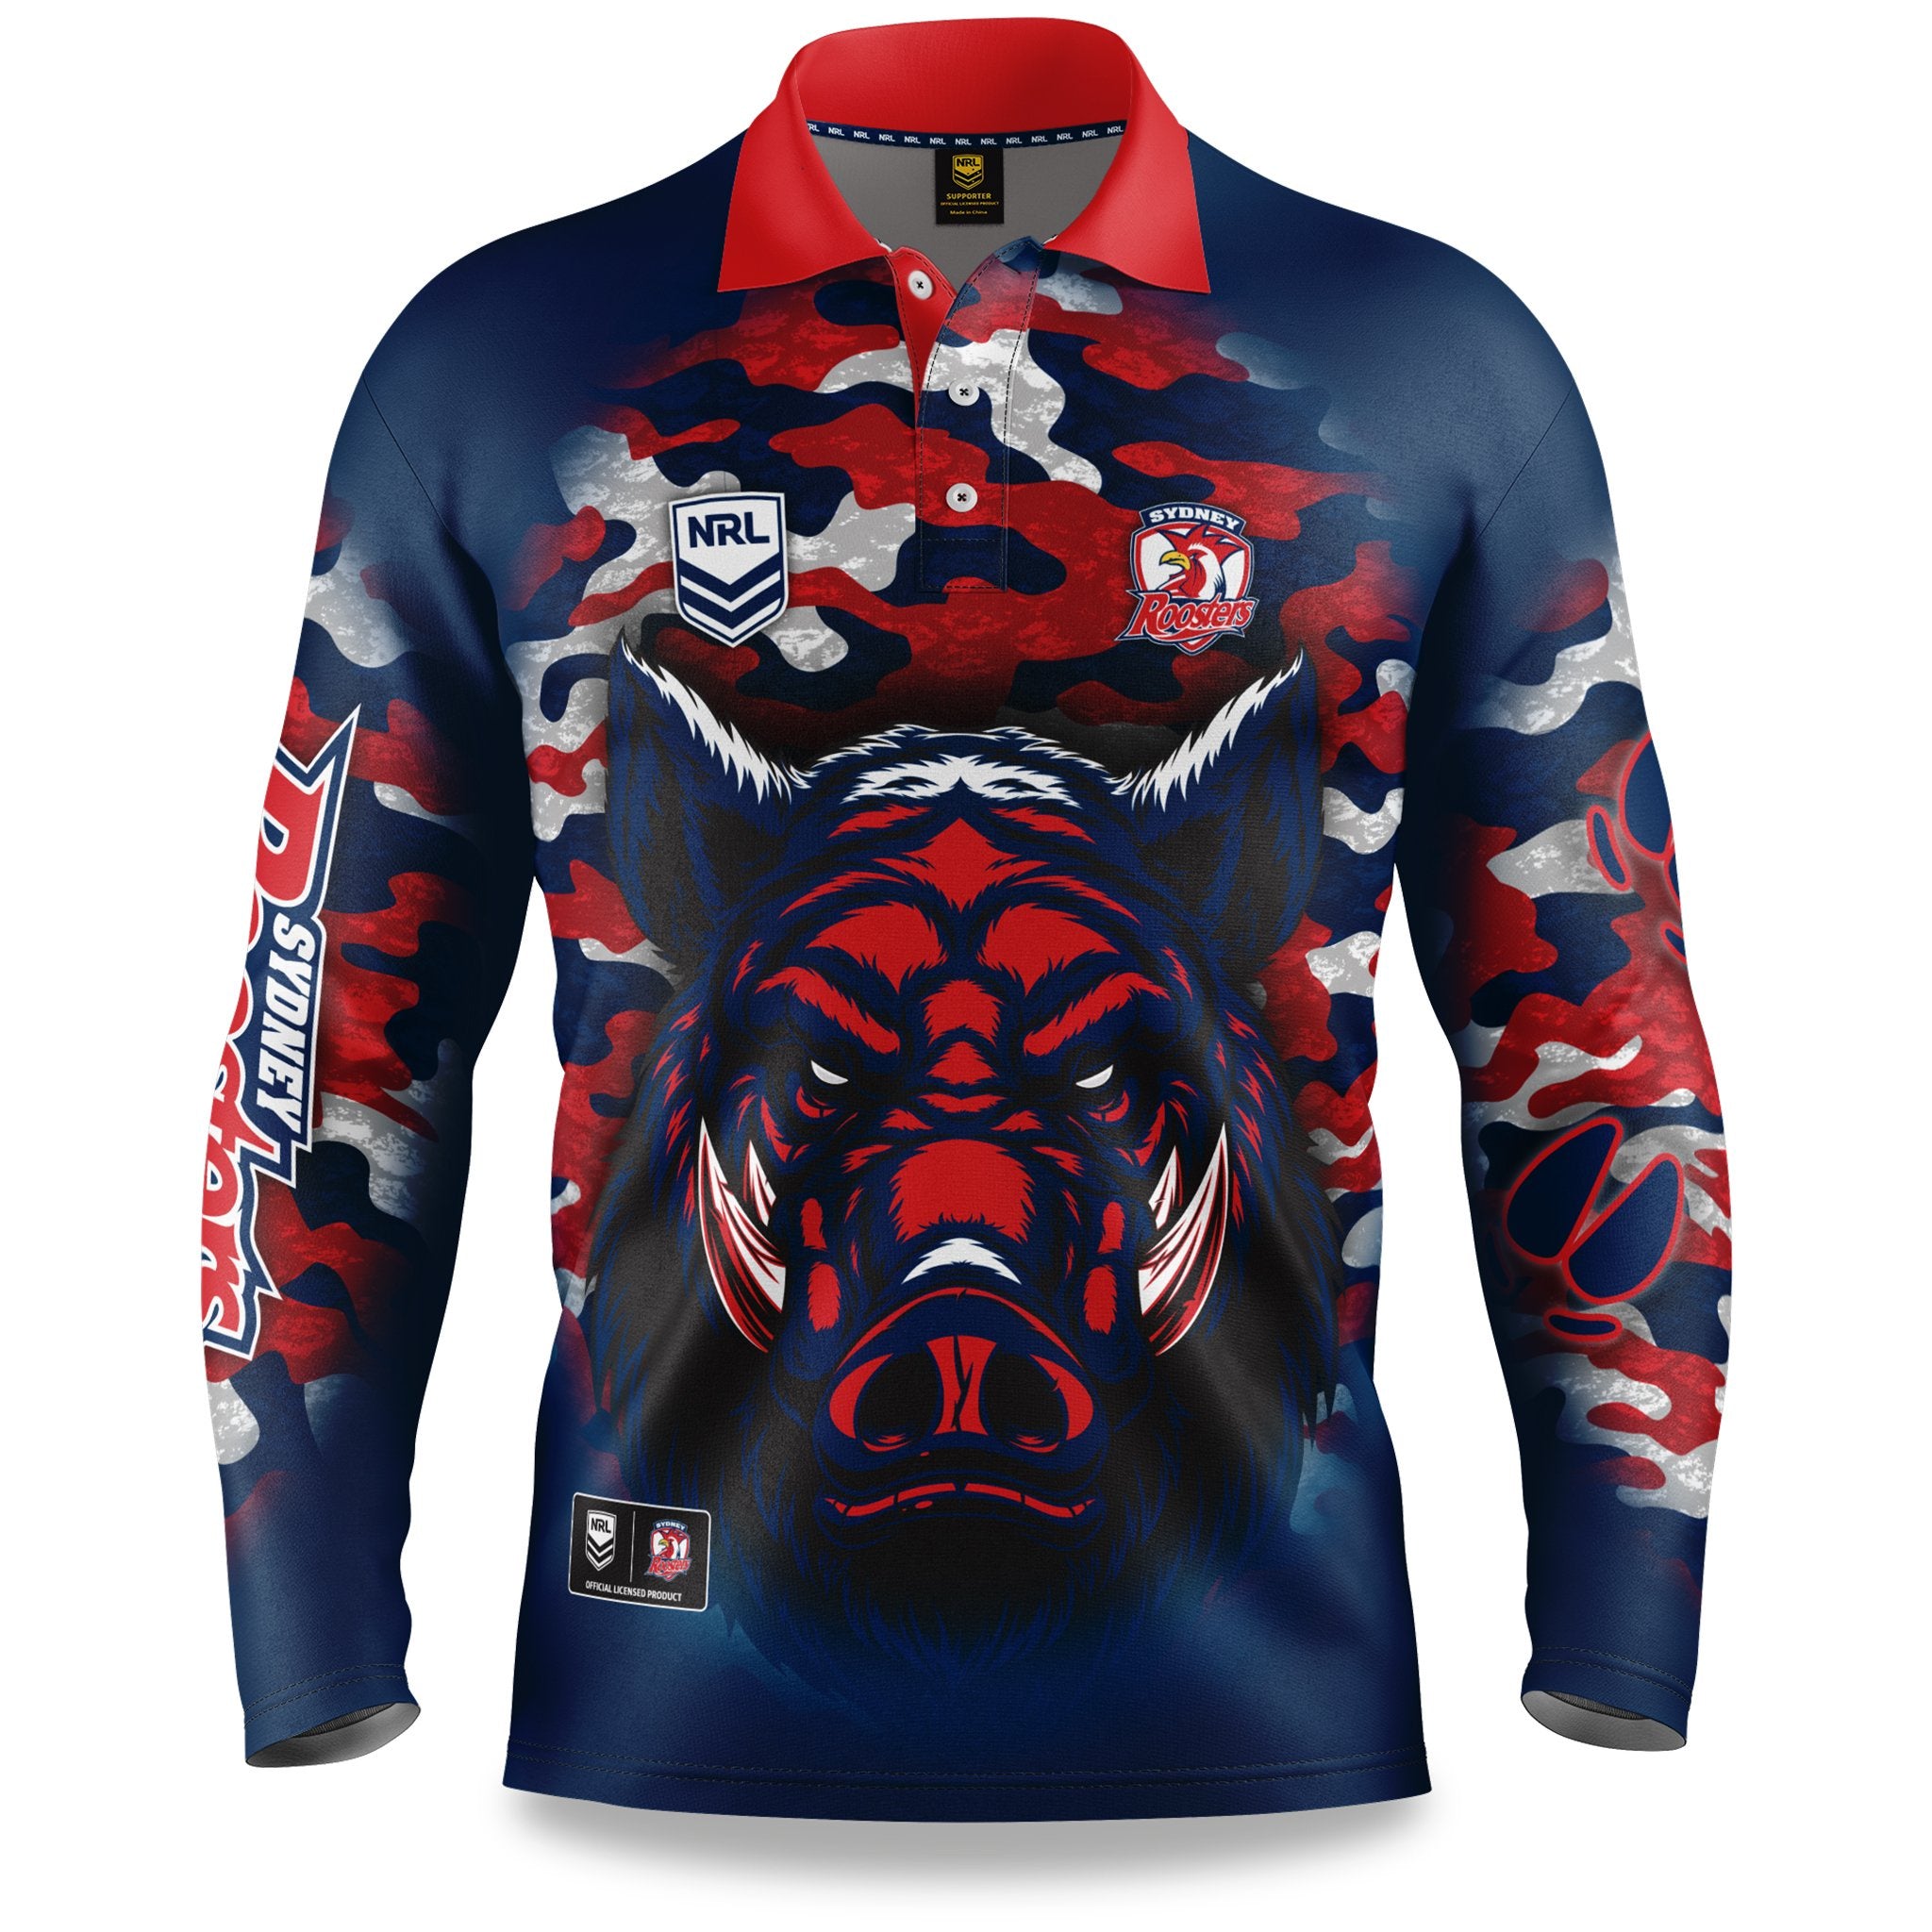 Outback Shirt NRL Roosters 20 - The Rugby Shop Darwin